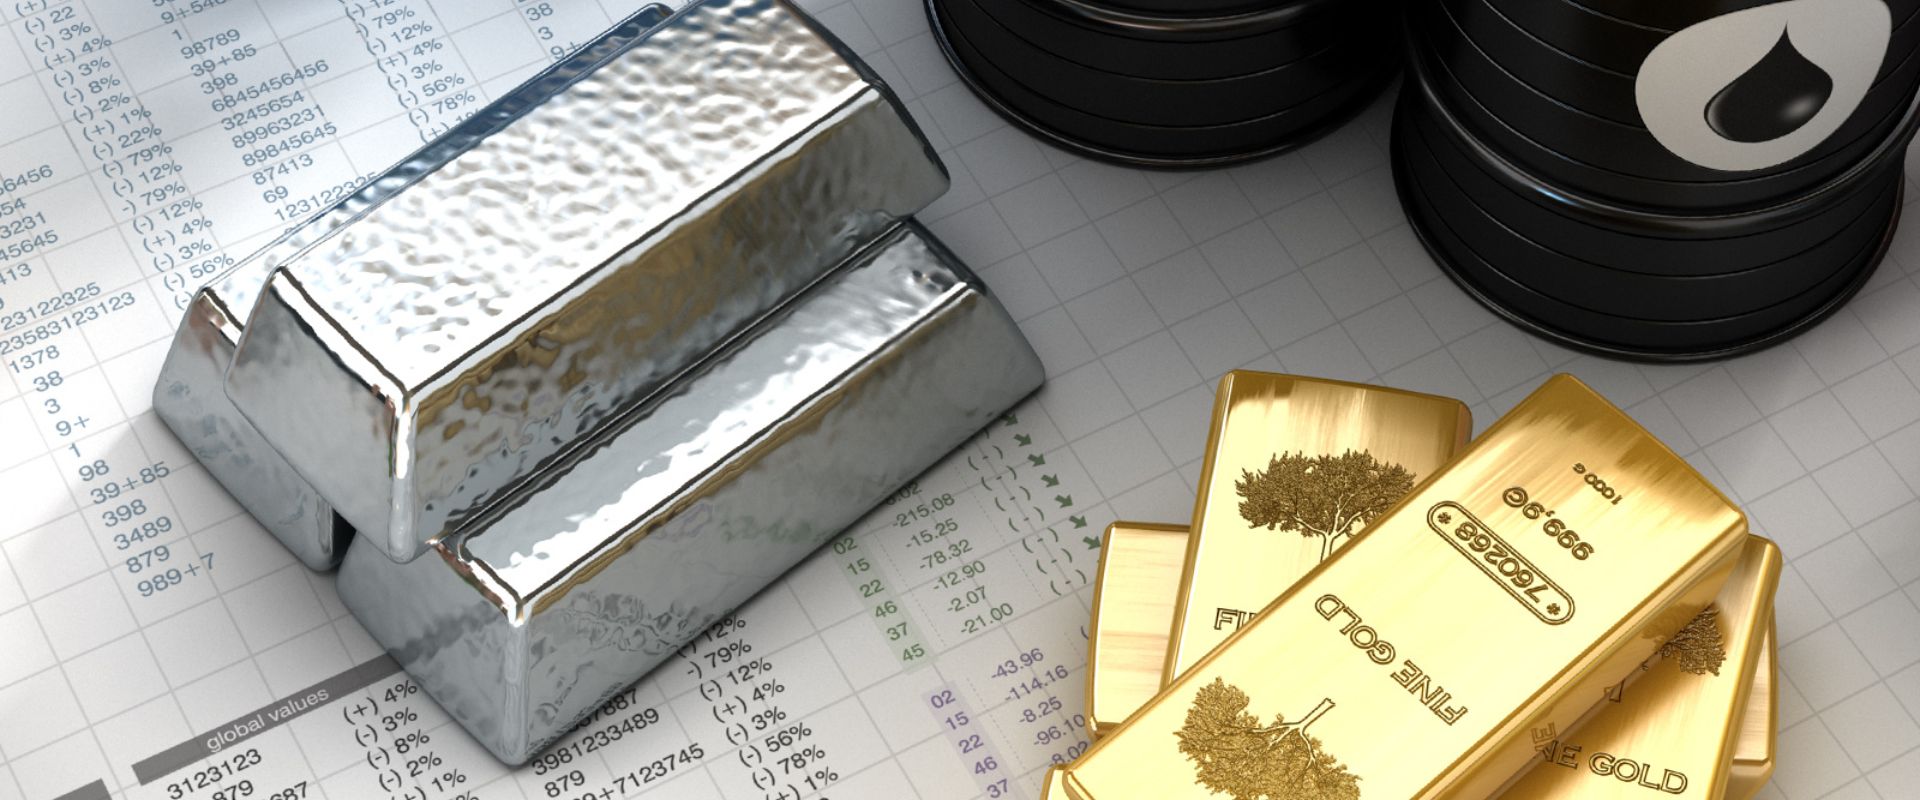 gold and silver bars and oil barrels